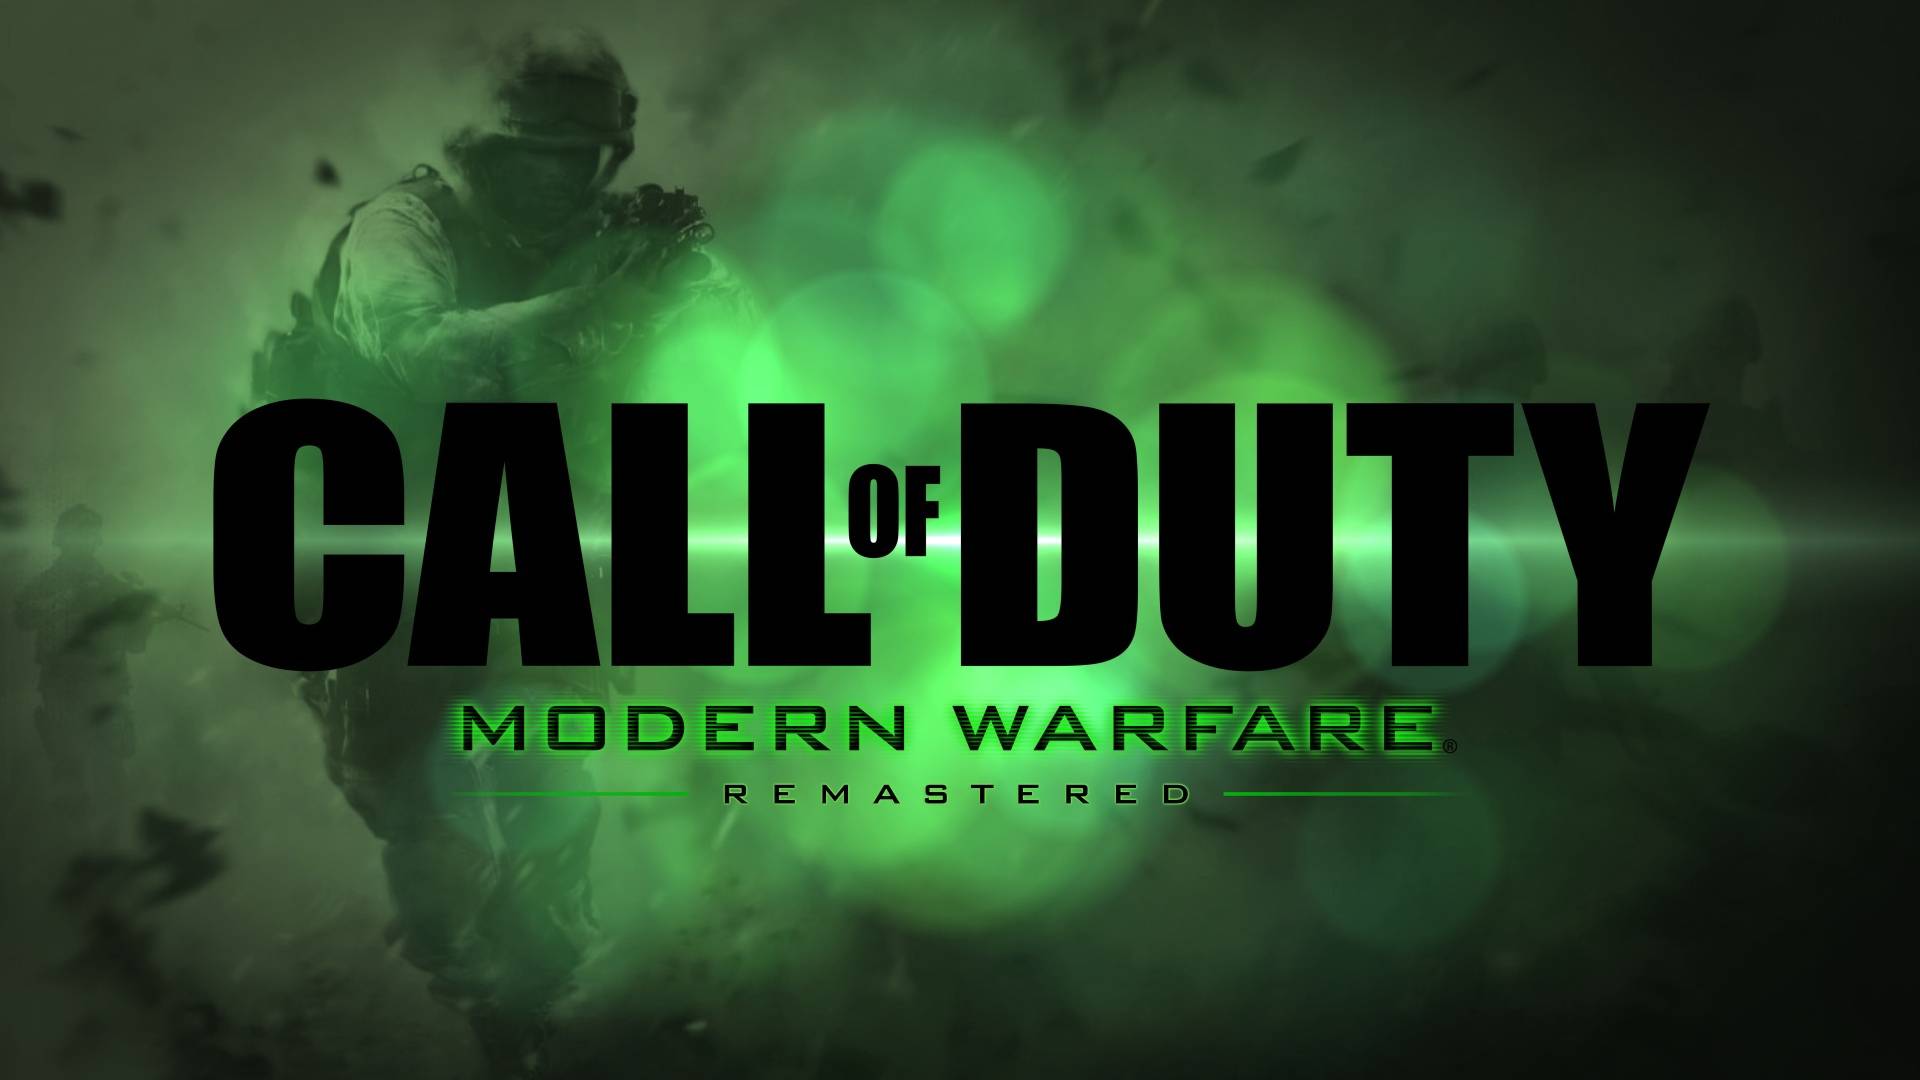 Steam must be running to play this game call of duty modern warfare фото 68